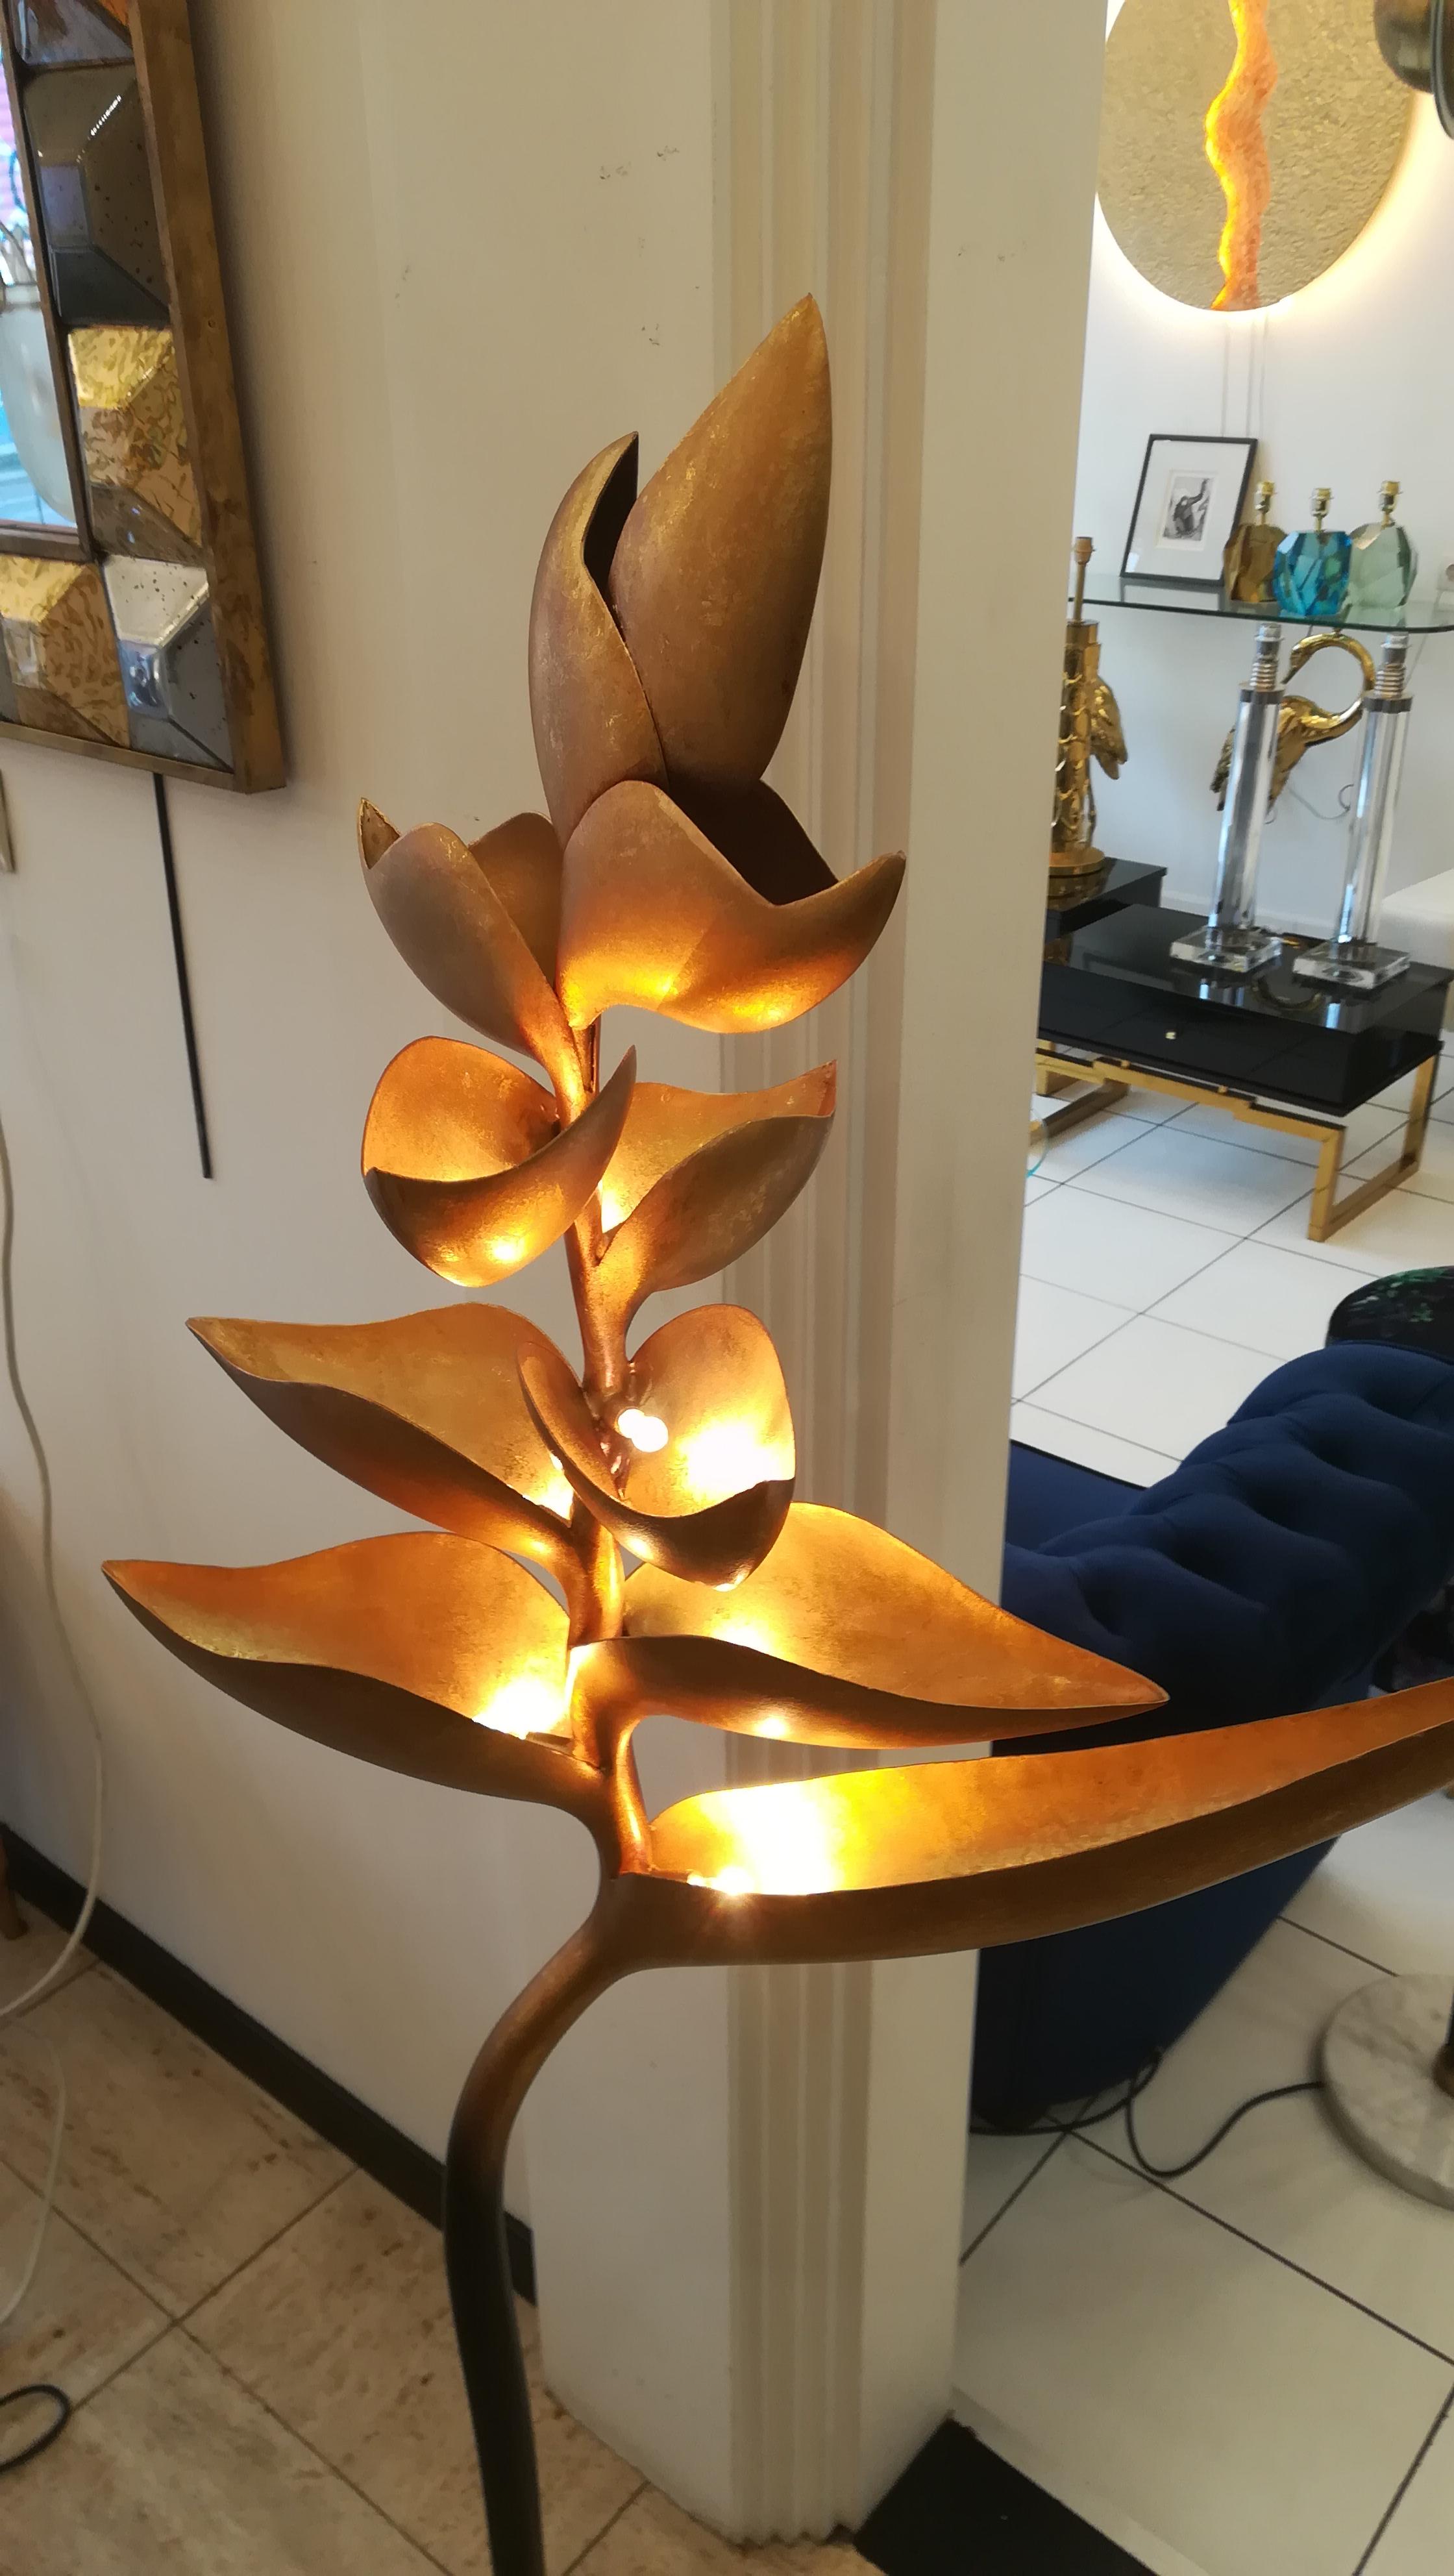 Paradise birds Floor Lamp Black and Gold Patinated Metal In Excellent Condition For Sale In Saint-Ouen, FR